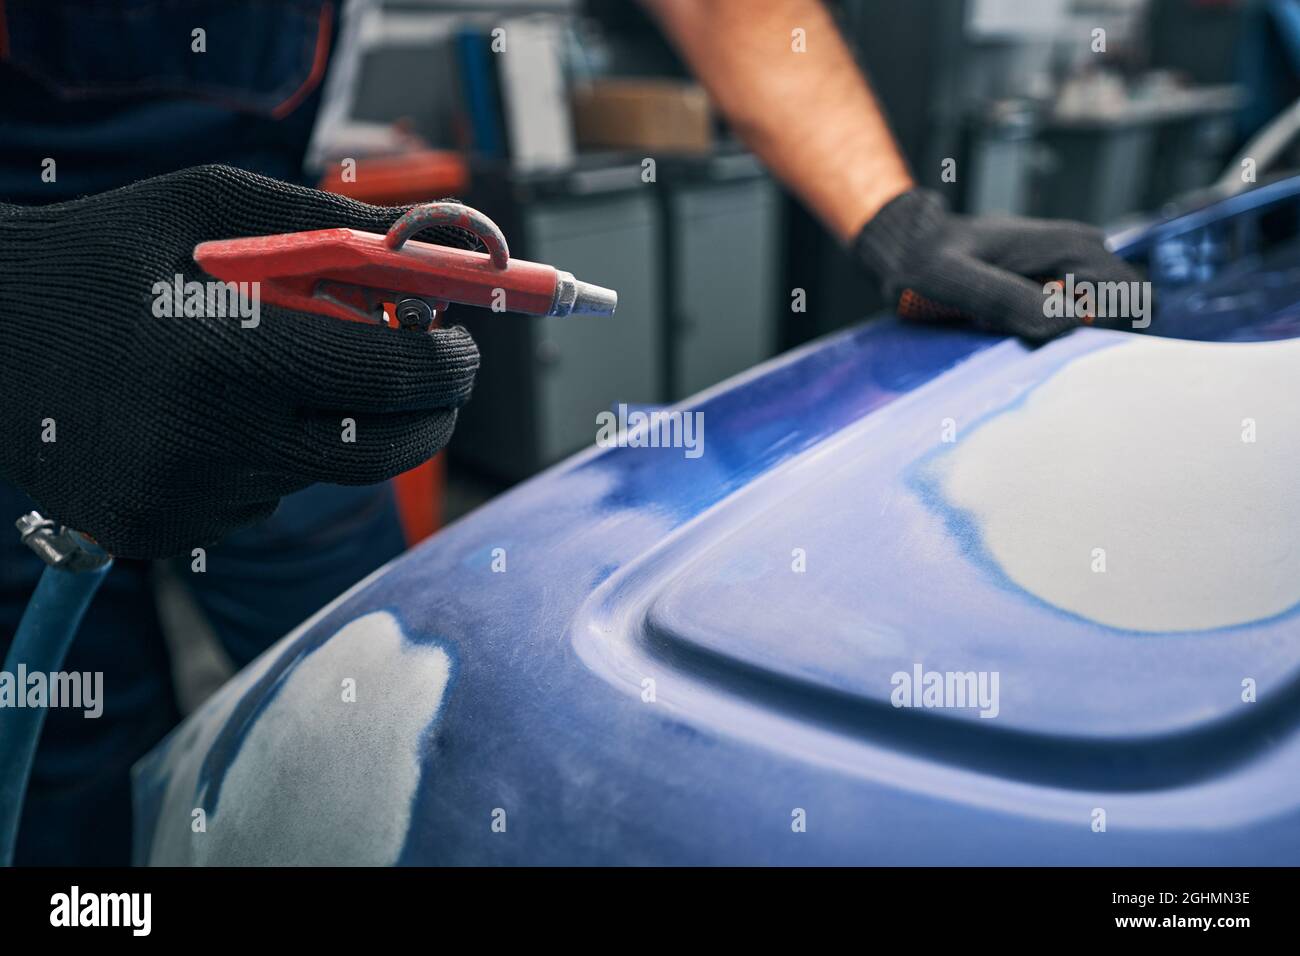 Automotive technician pressing on air gun while cleaning car Stock Photo